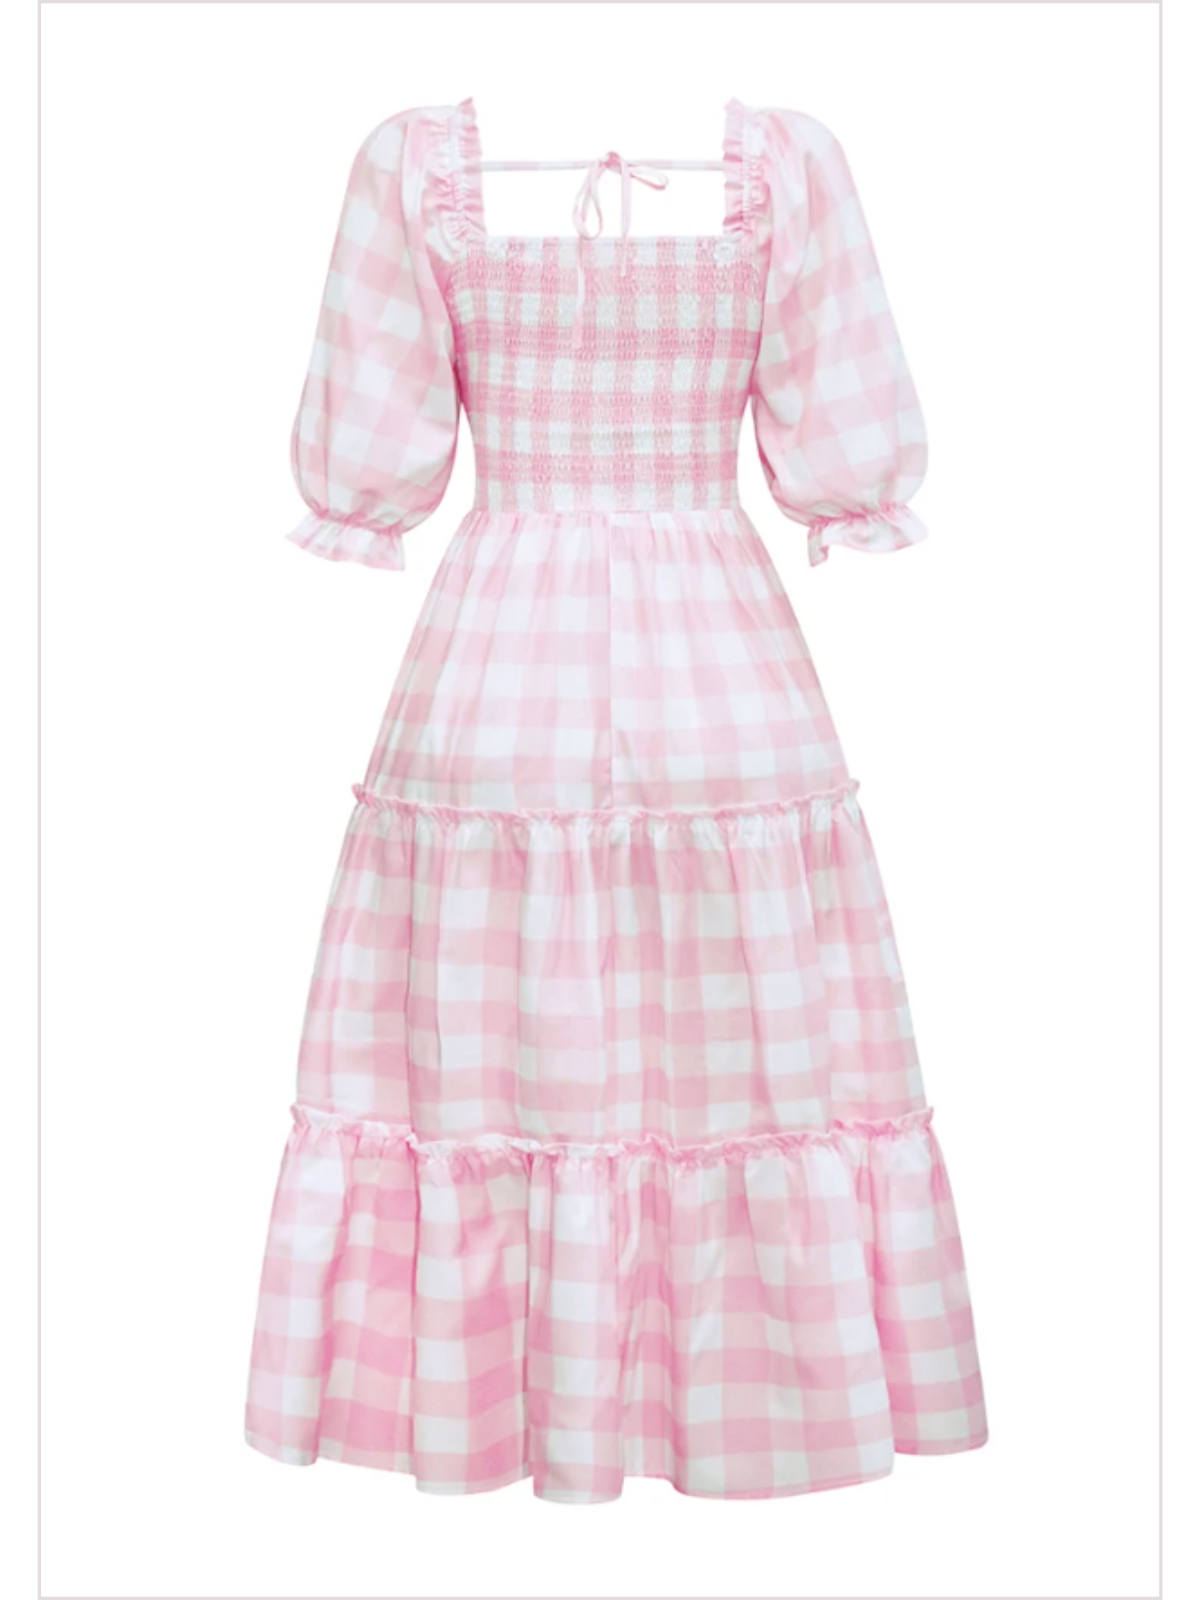 Mia Belle Girls Pink Gingham Smocked Dress | Mommy And Me Dresses